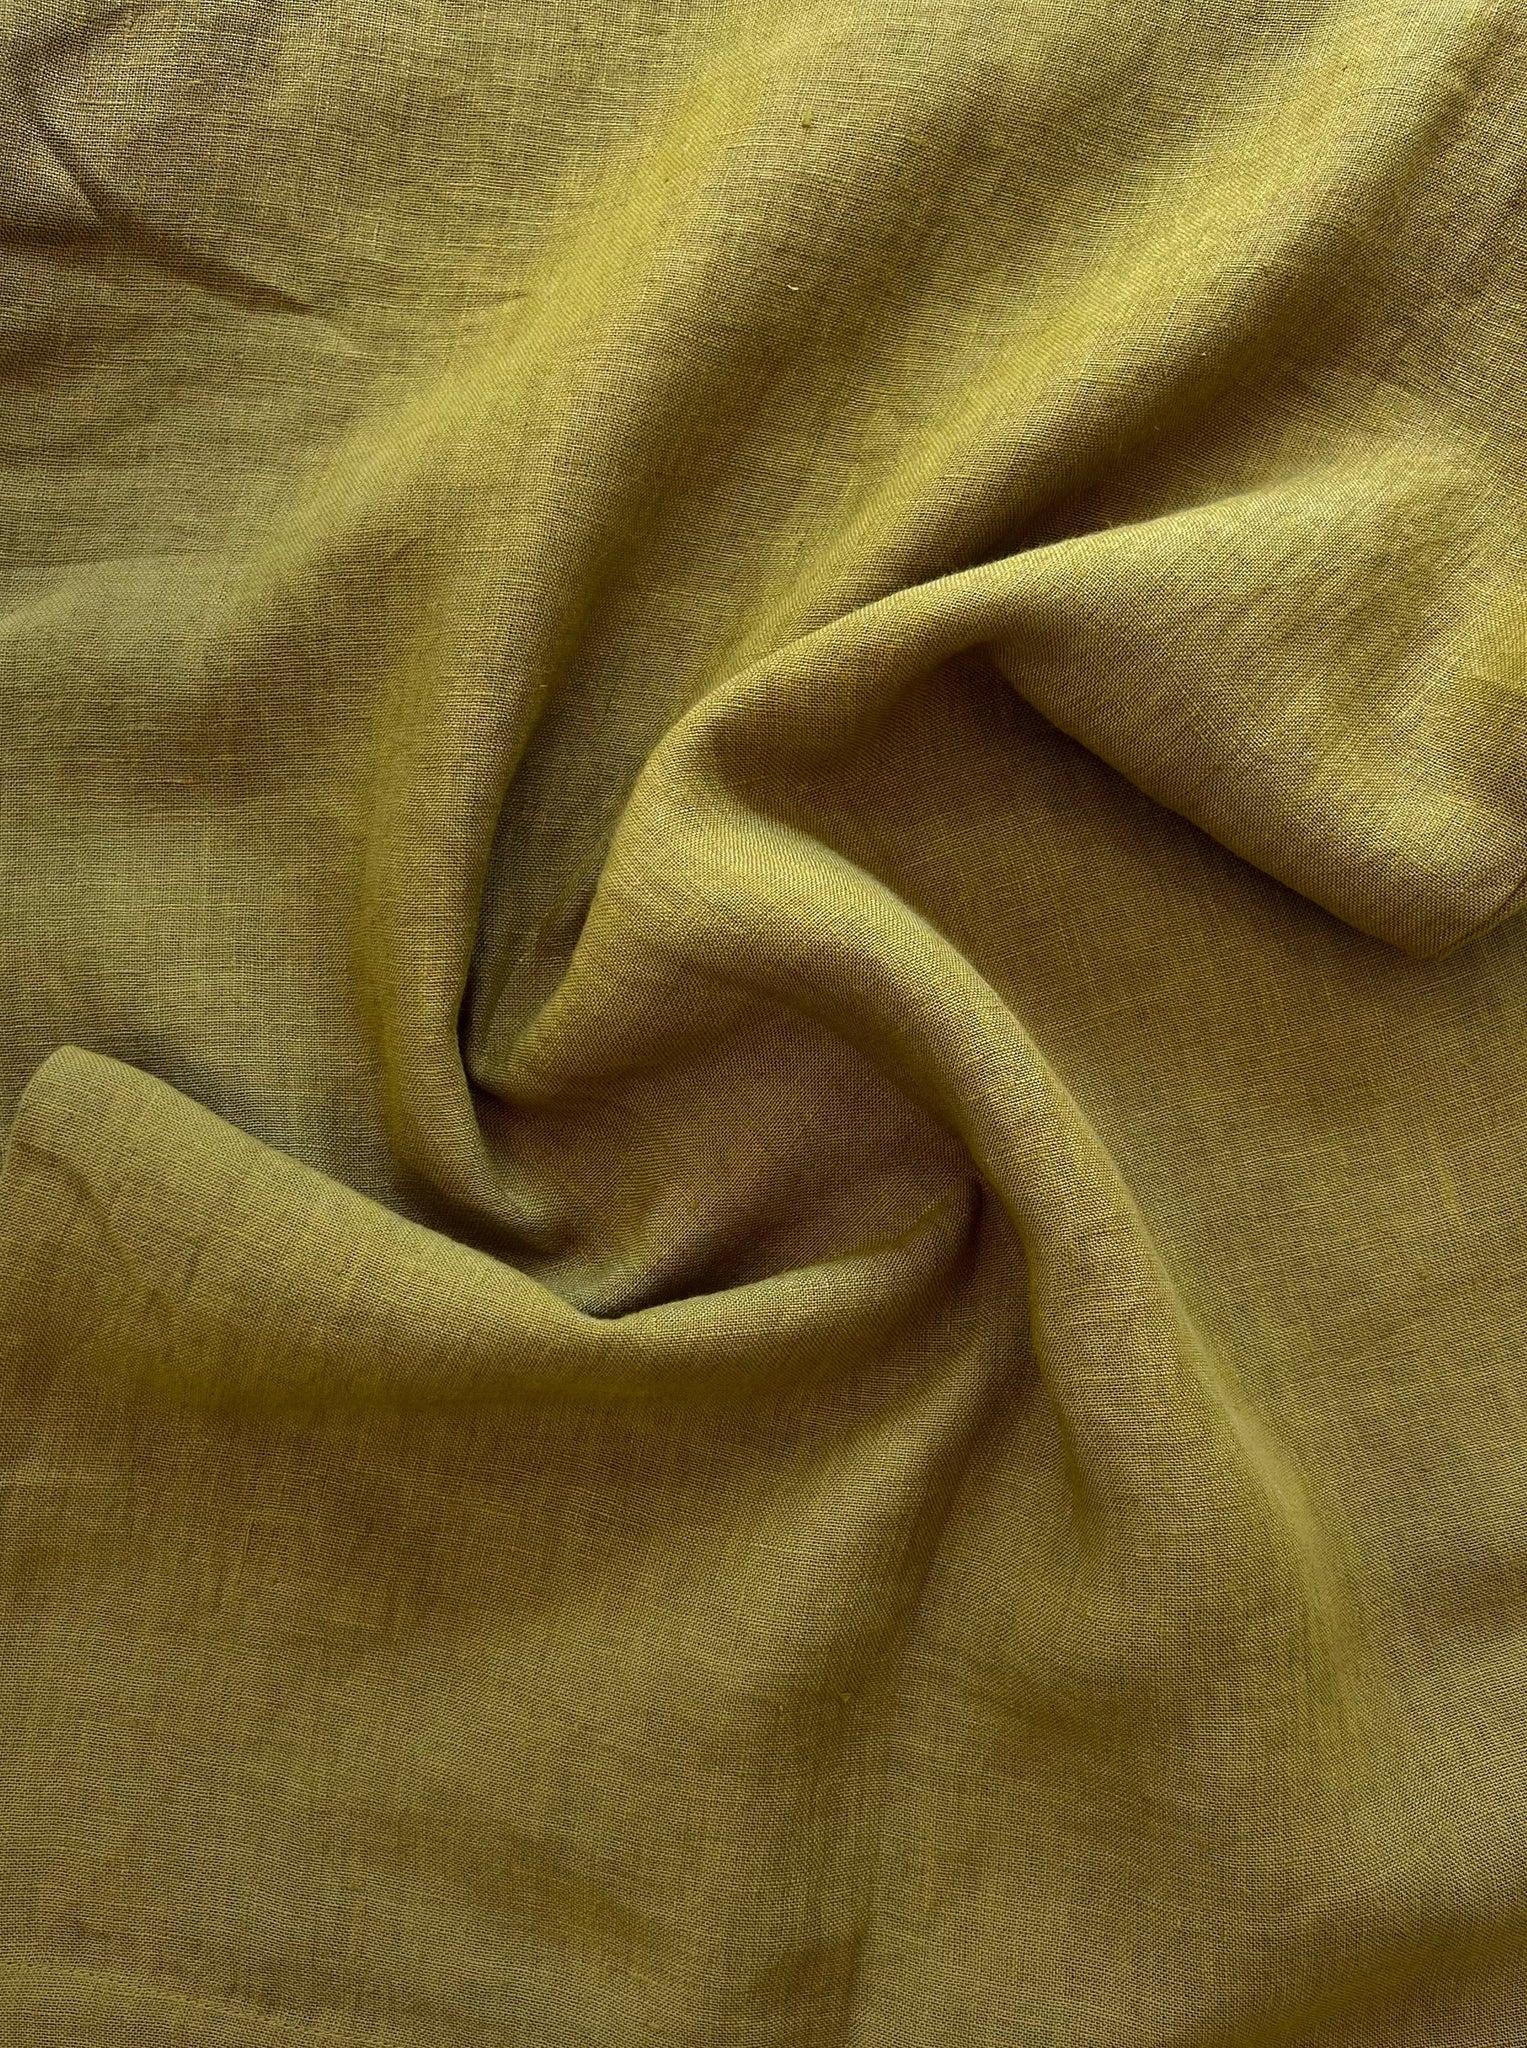 A close up image of Everyday Short - Dried Tobacco in a yellow linen fabric.